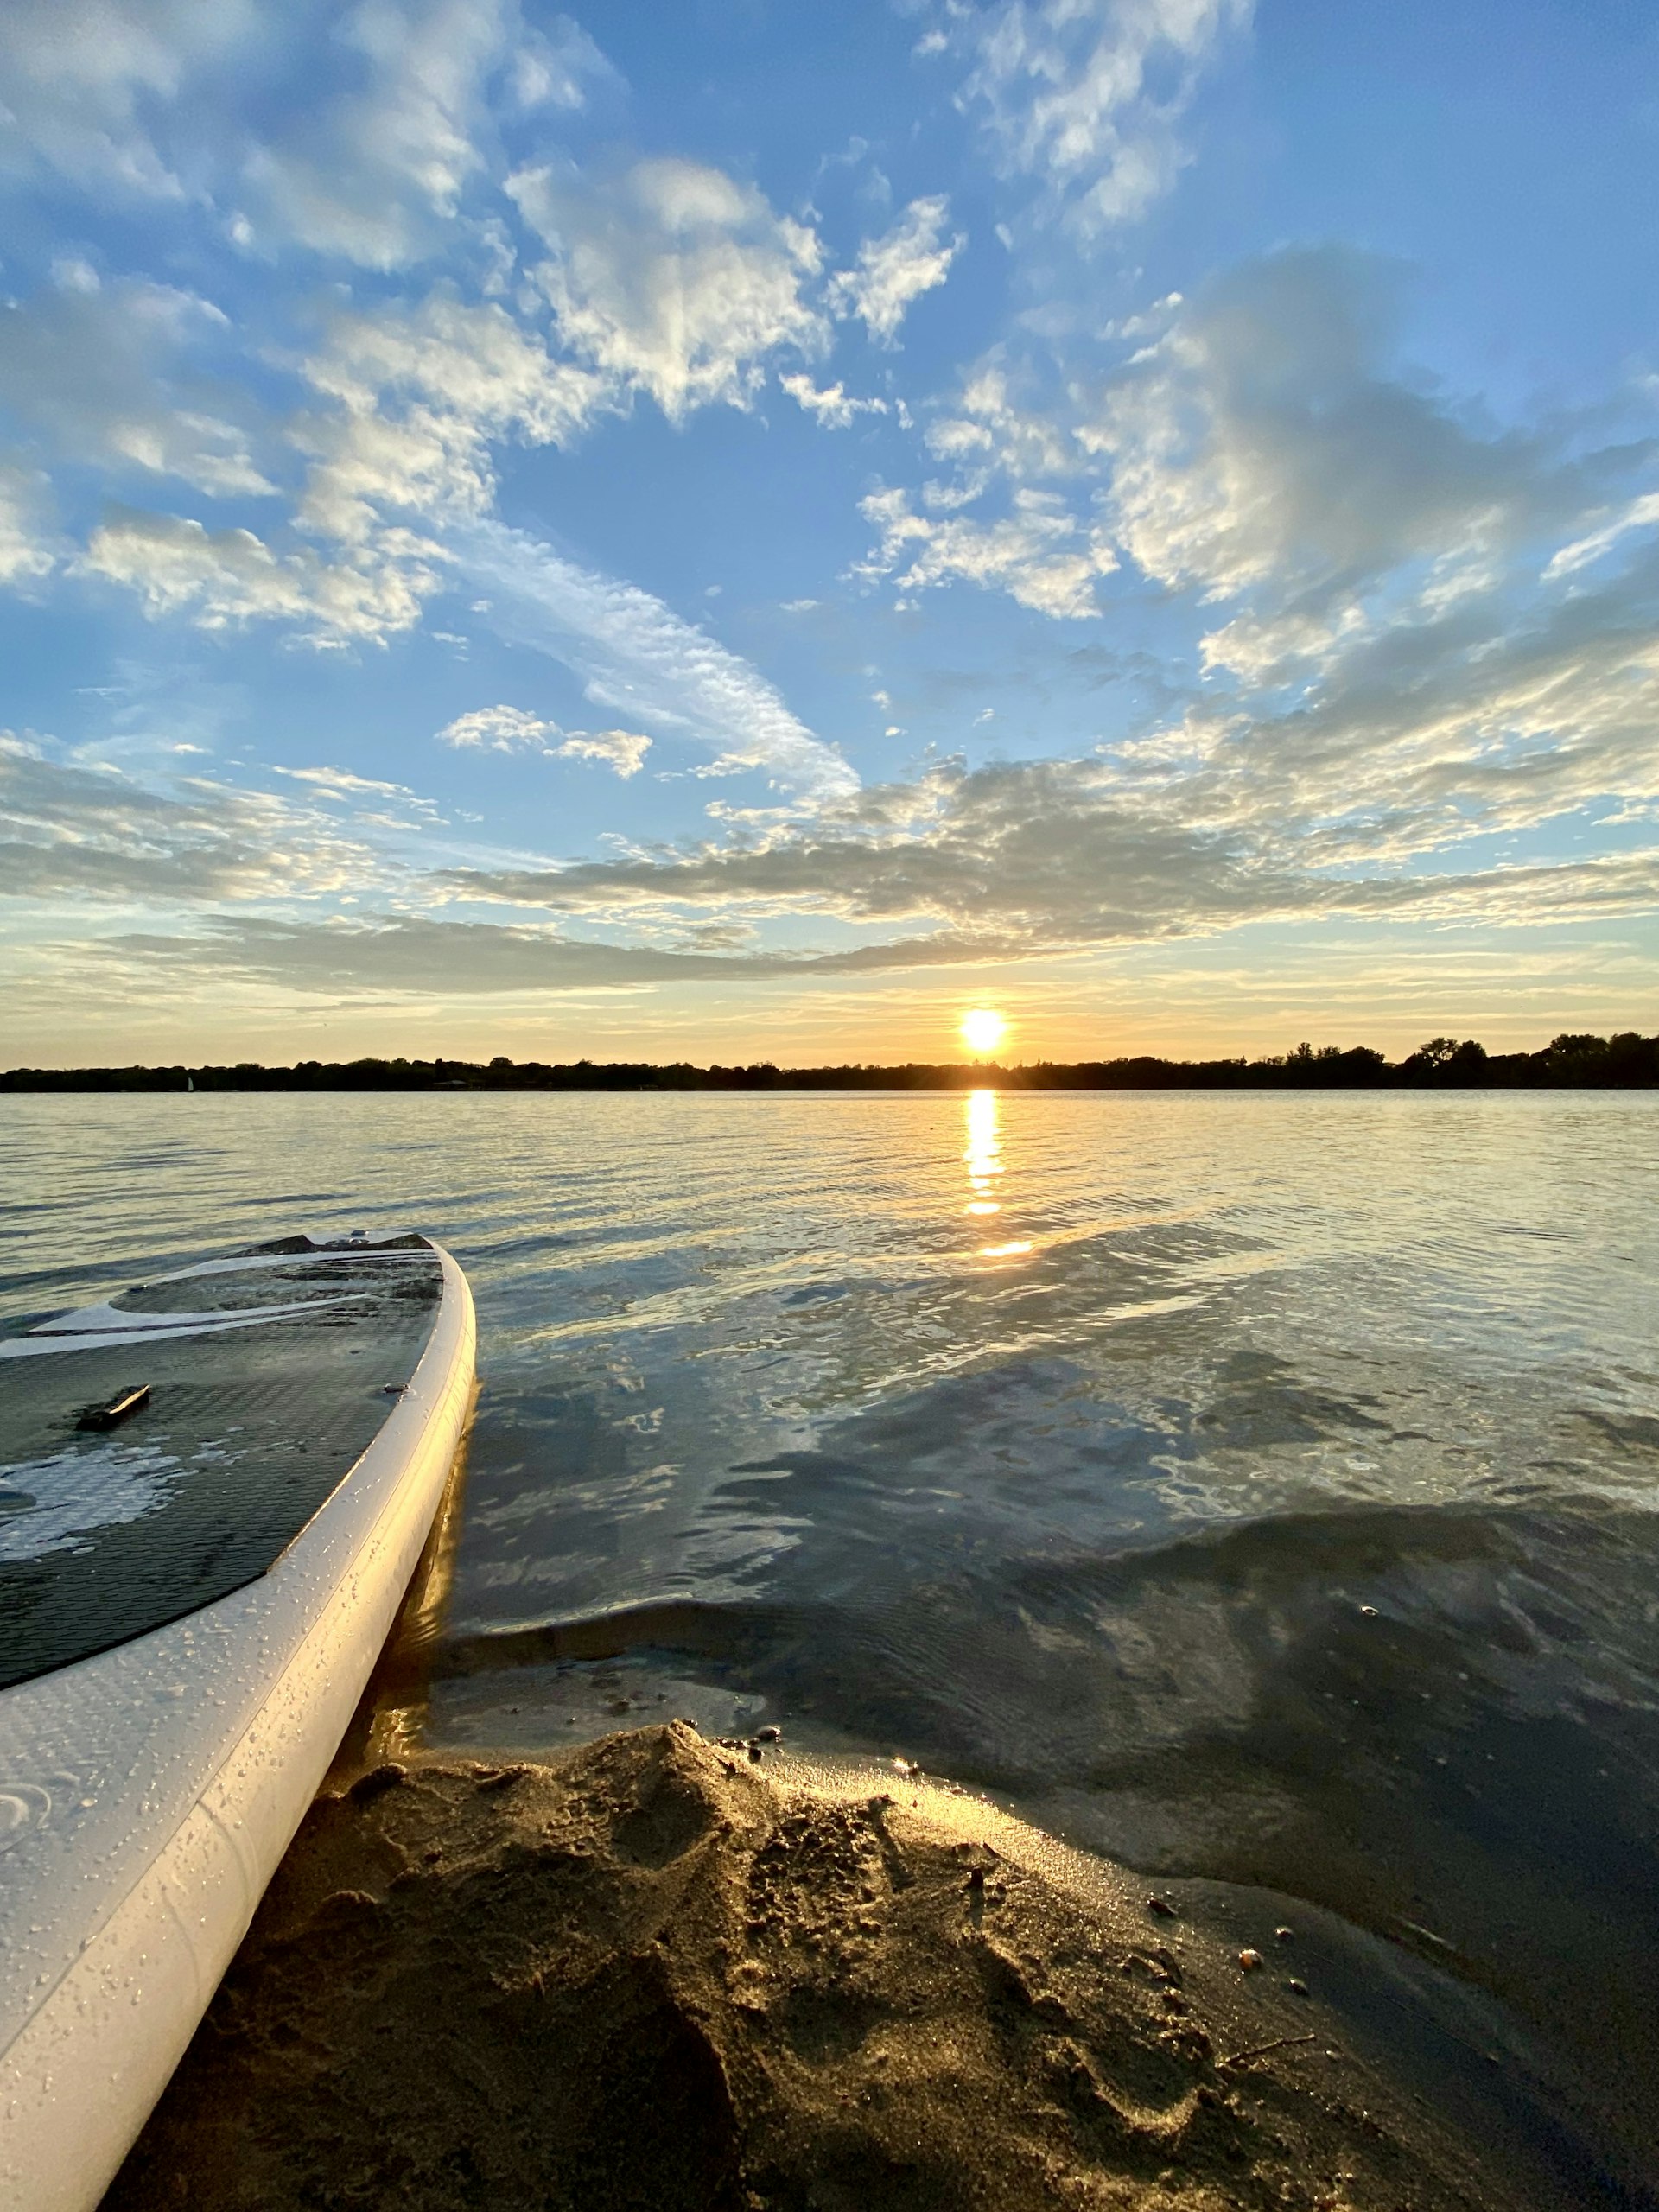 A shot looking down a paddleboard out onto a lake as the sun sends orange streaks across a blue cloudy sky